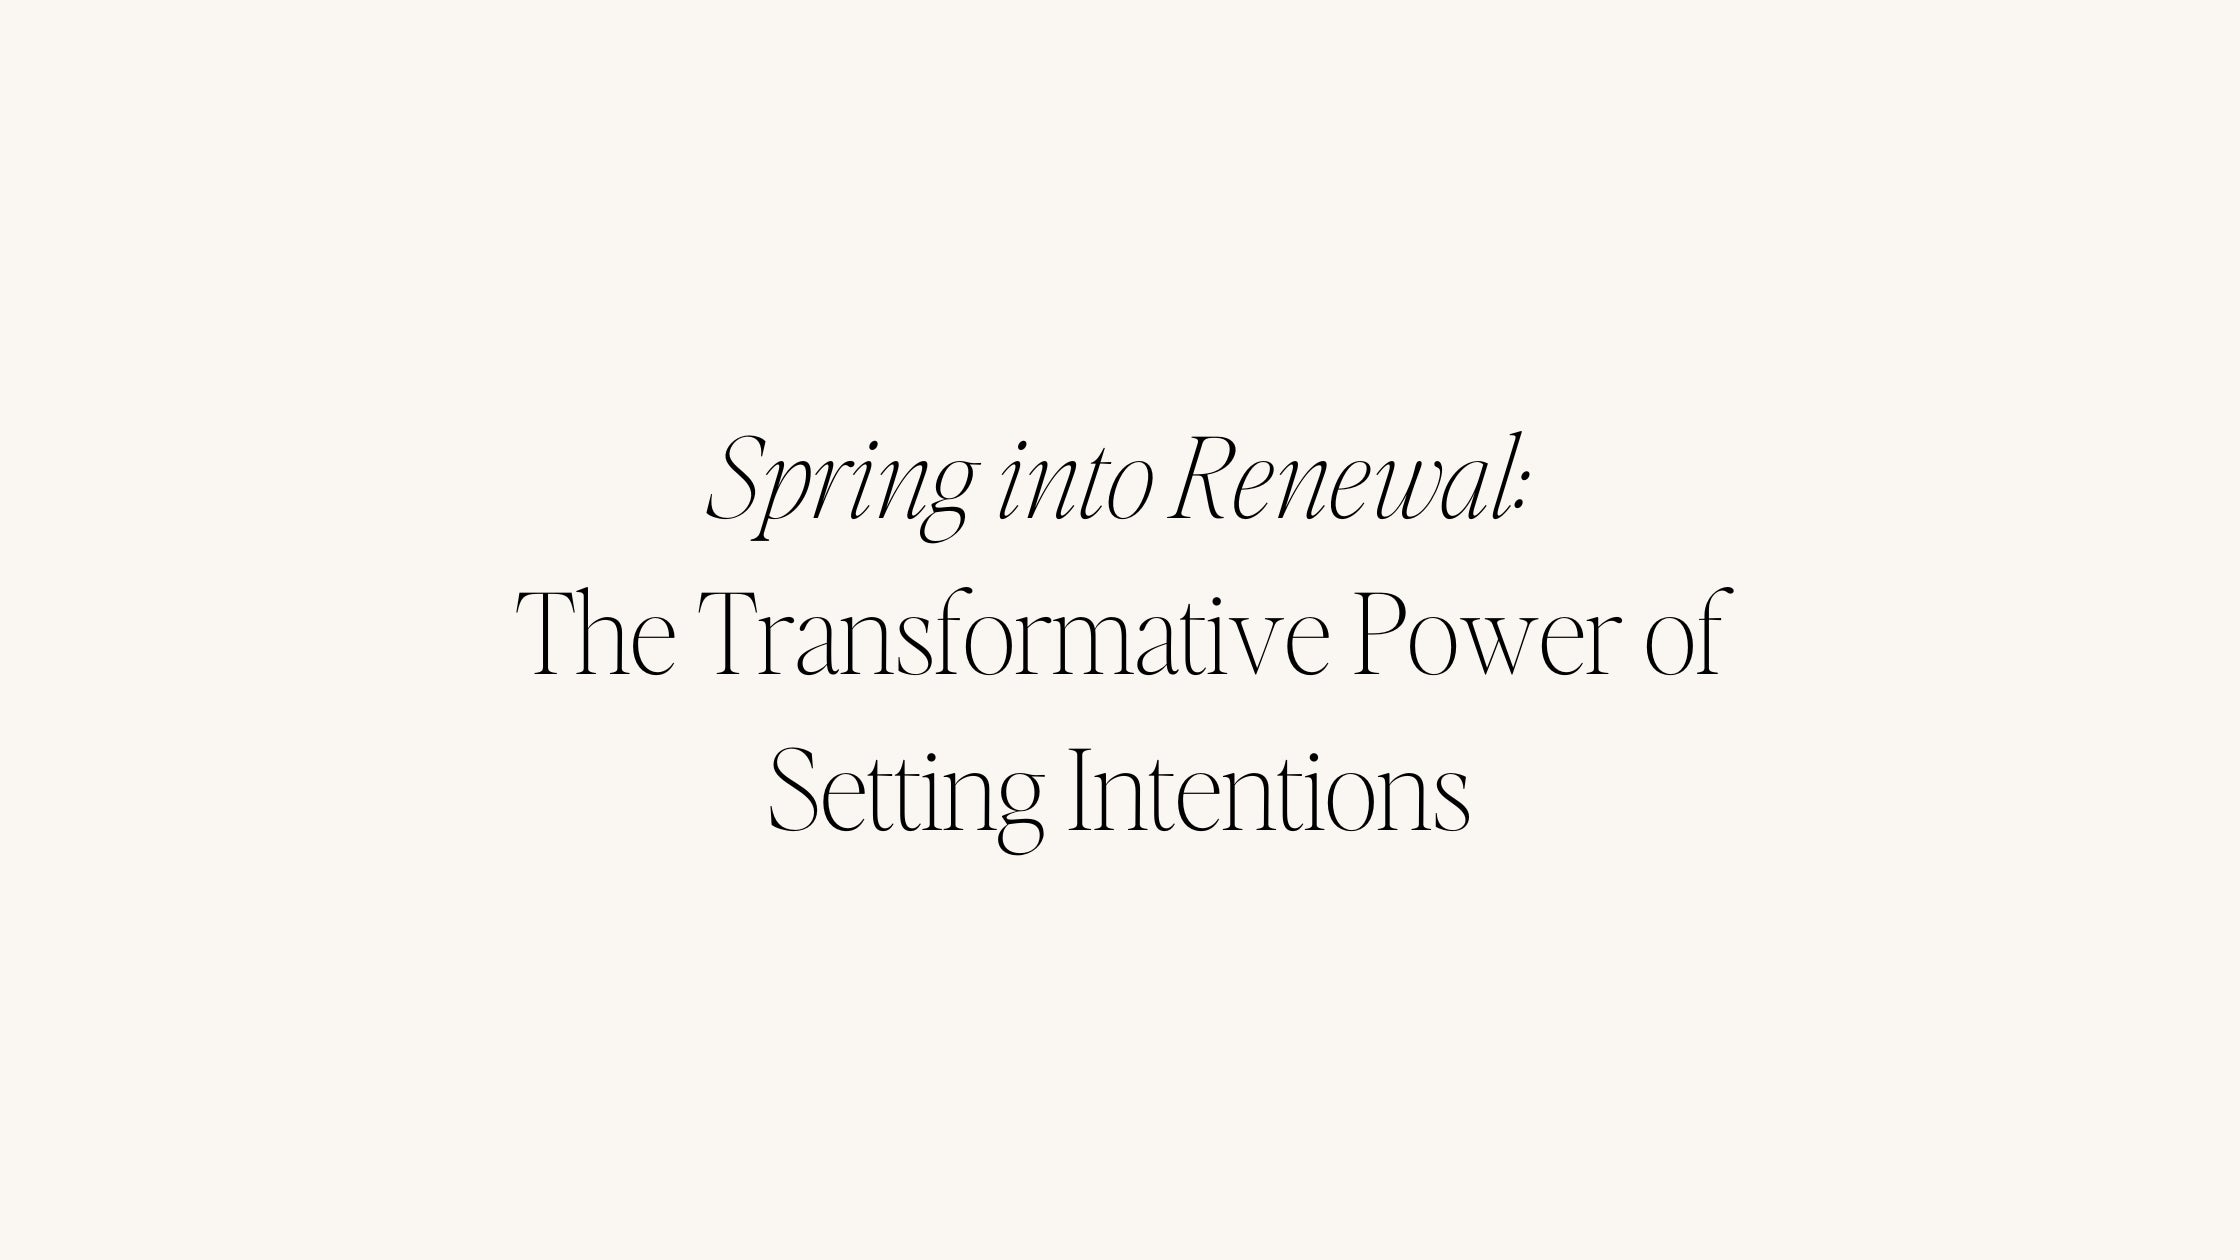 Spring into Renewal: The Transformative Power of Setting Intentions